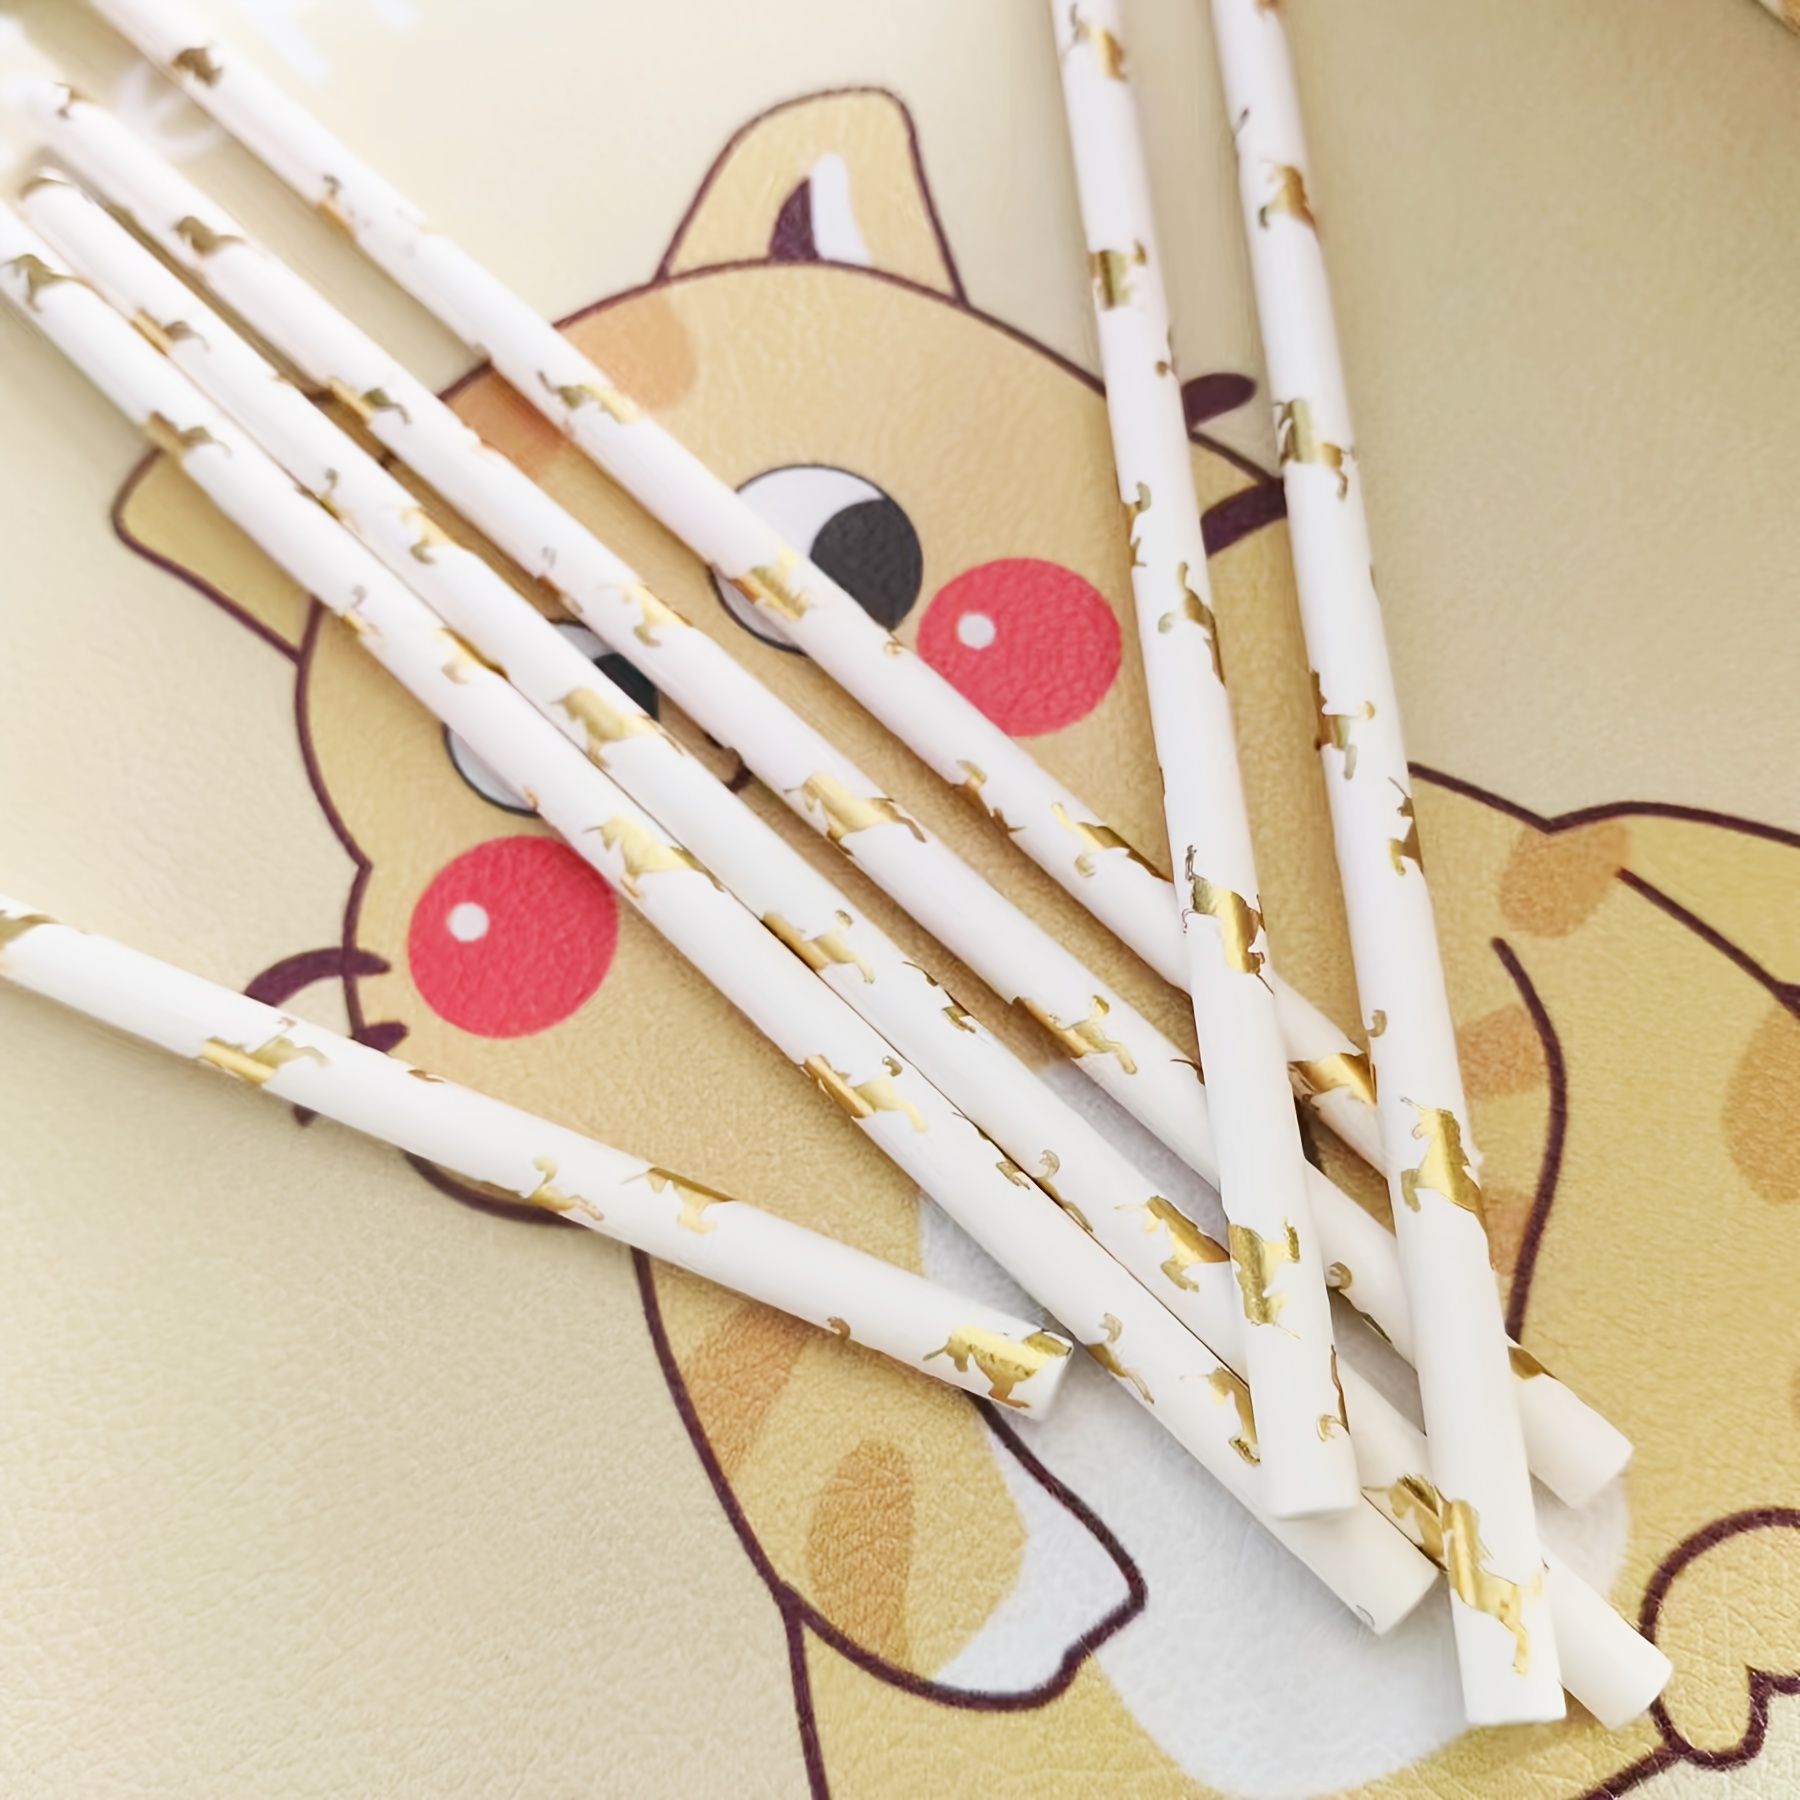 1pc 10mm Colorful Straw Cover For Bubble Tea Straw, Dustproof Cap & Pearl  Milk Tea Straw Cover